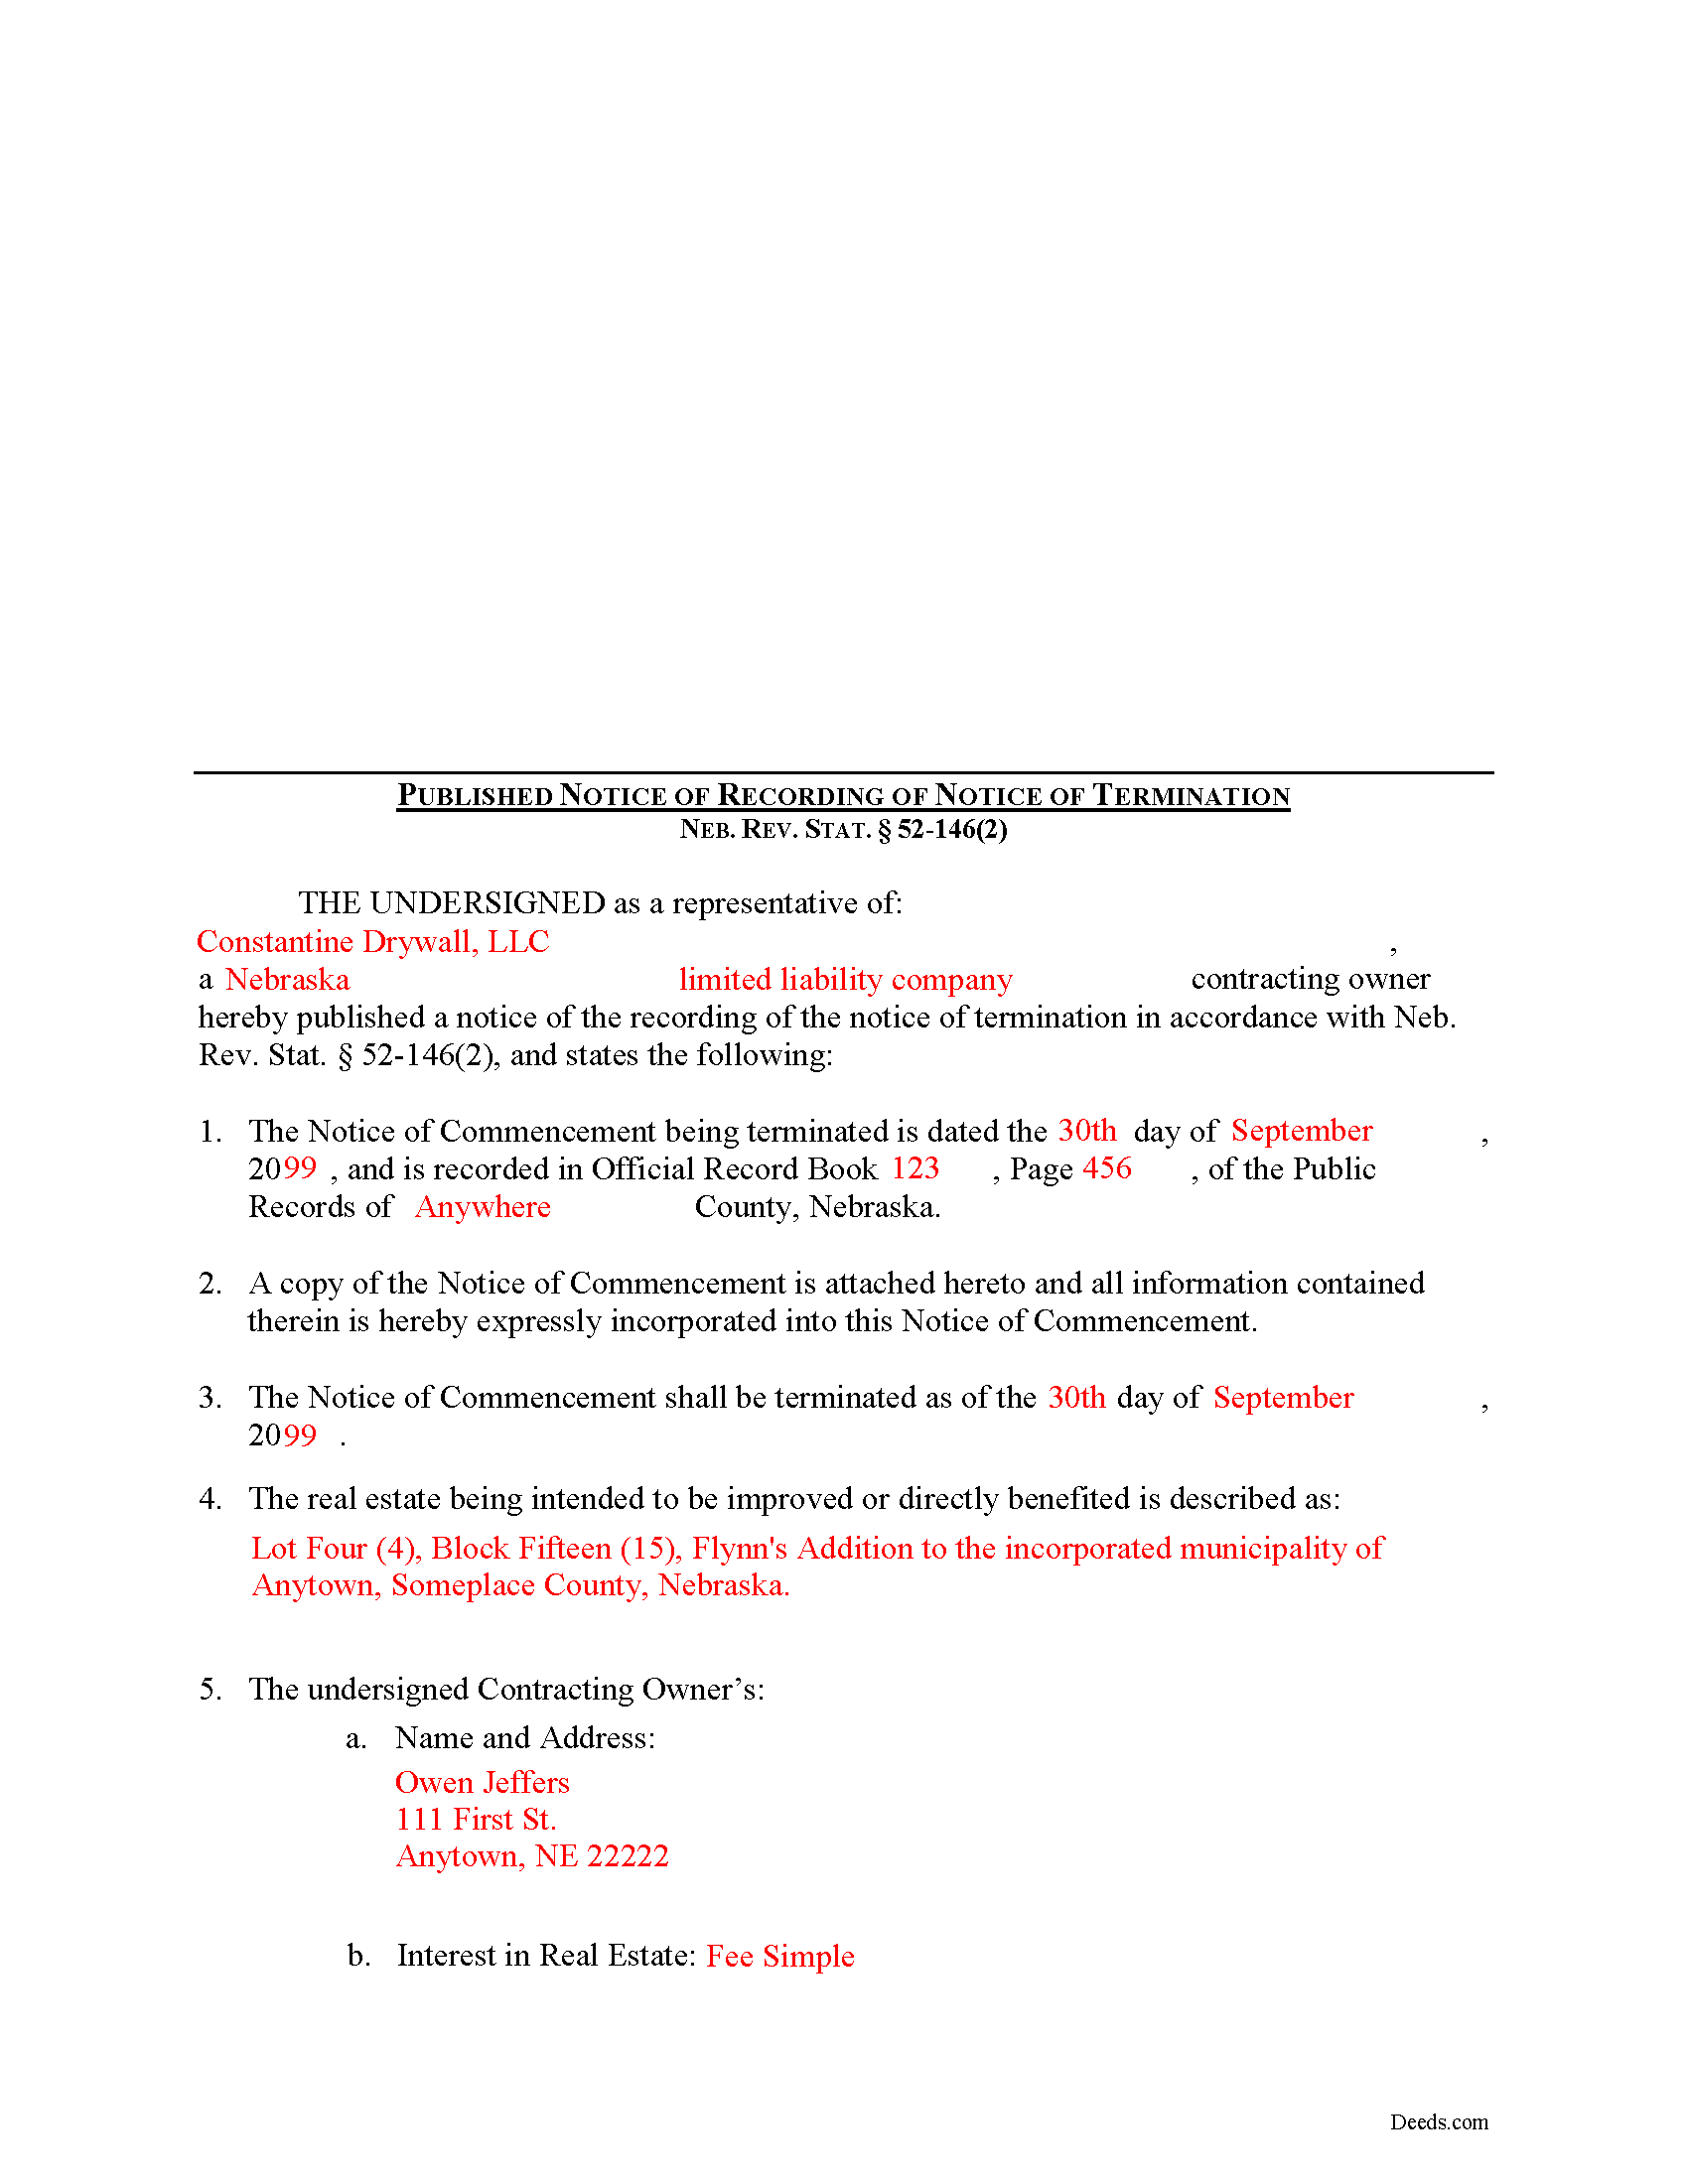 Completed Example of the Published Notice of Termination Document